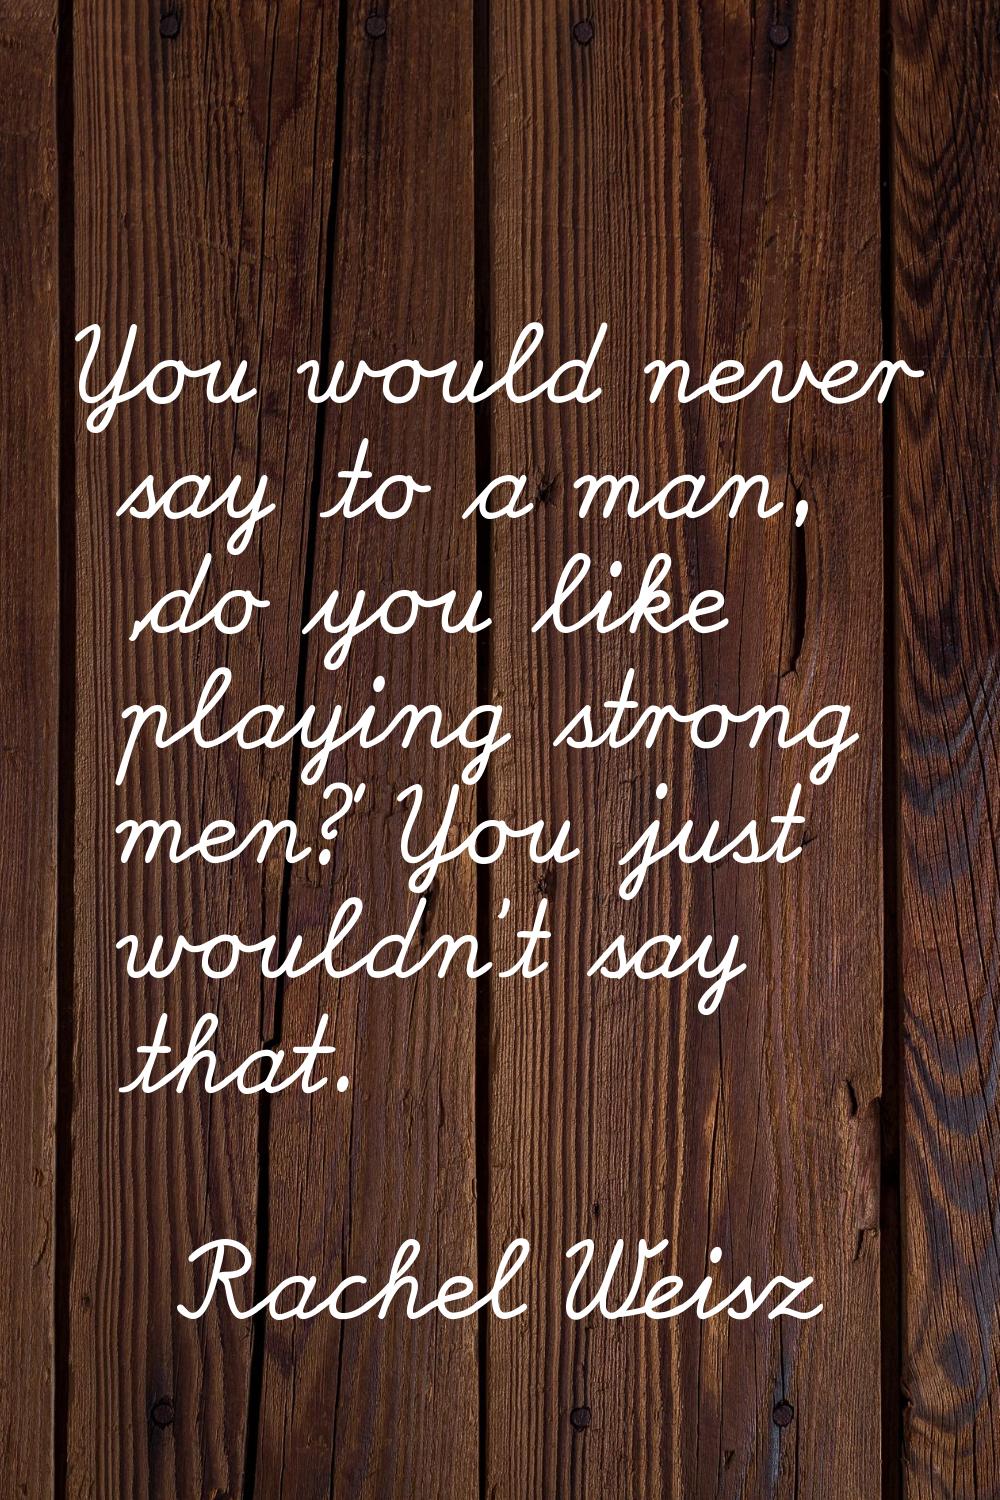 You would never say to a man, 'do you like playing strong men?' You just wouldn't say that.